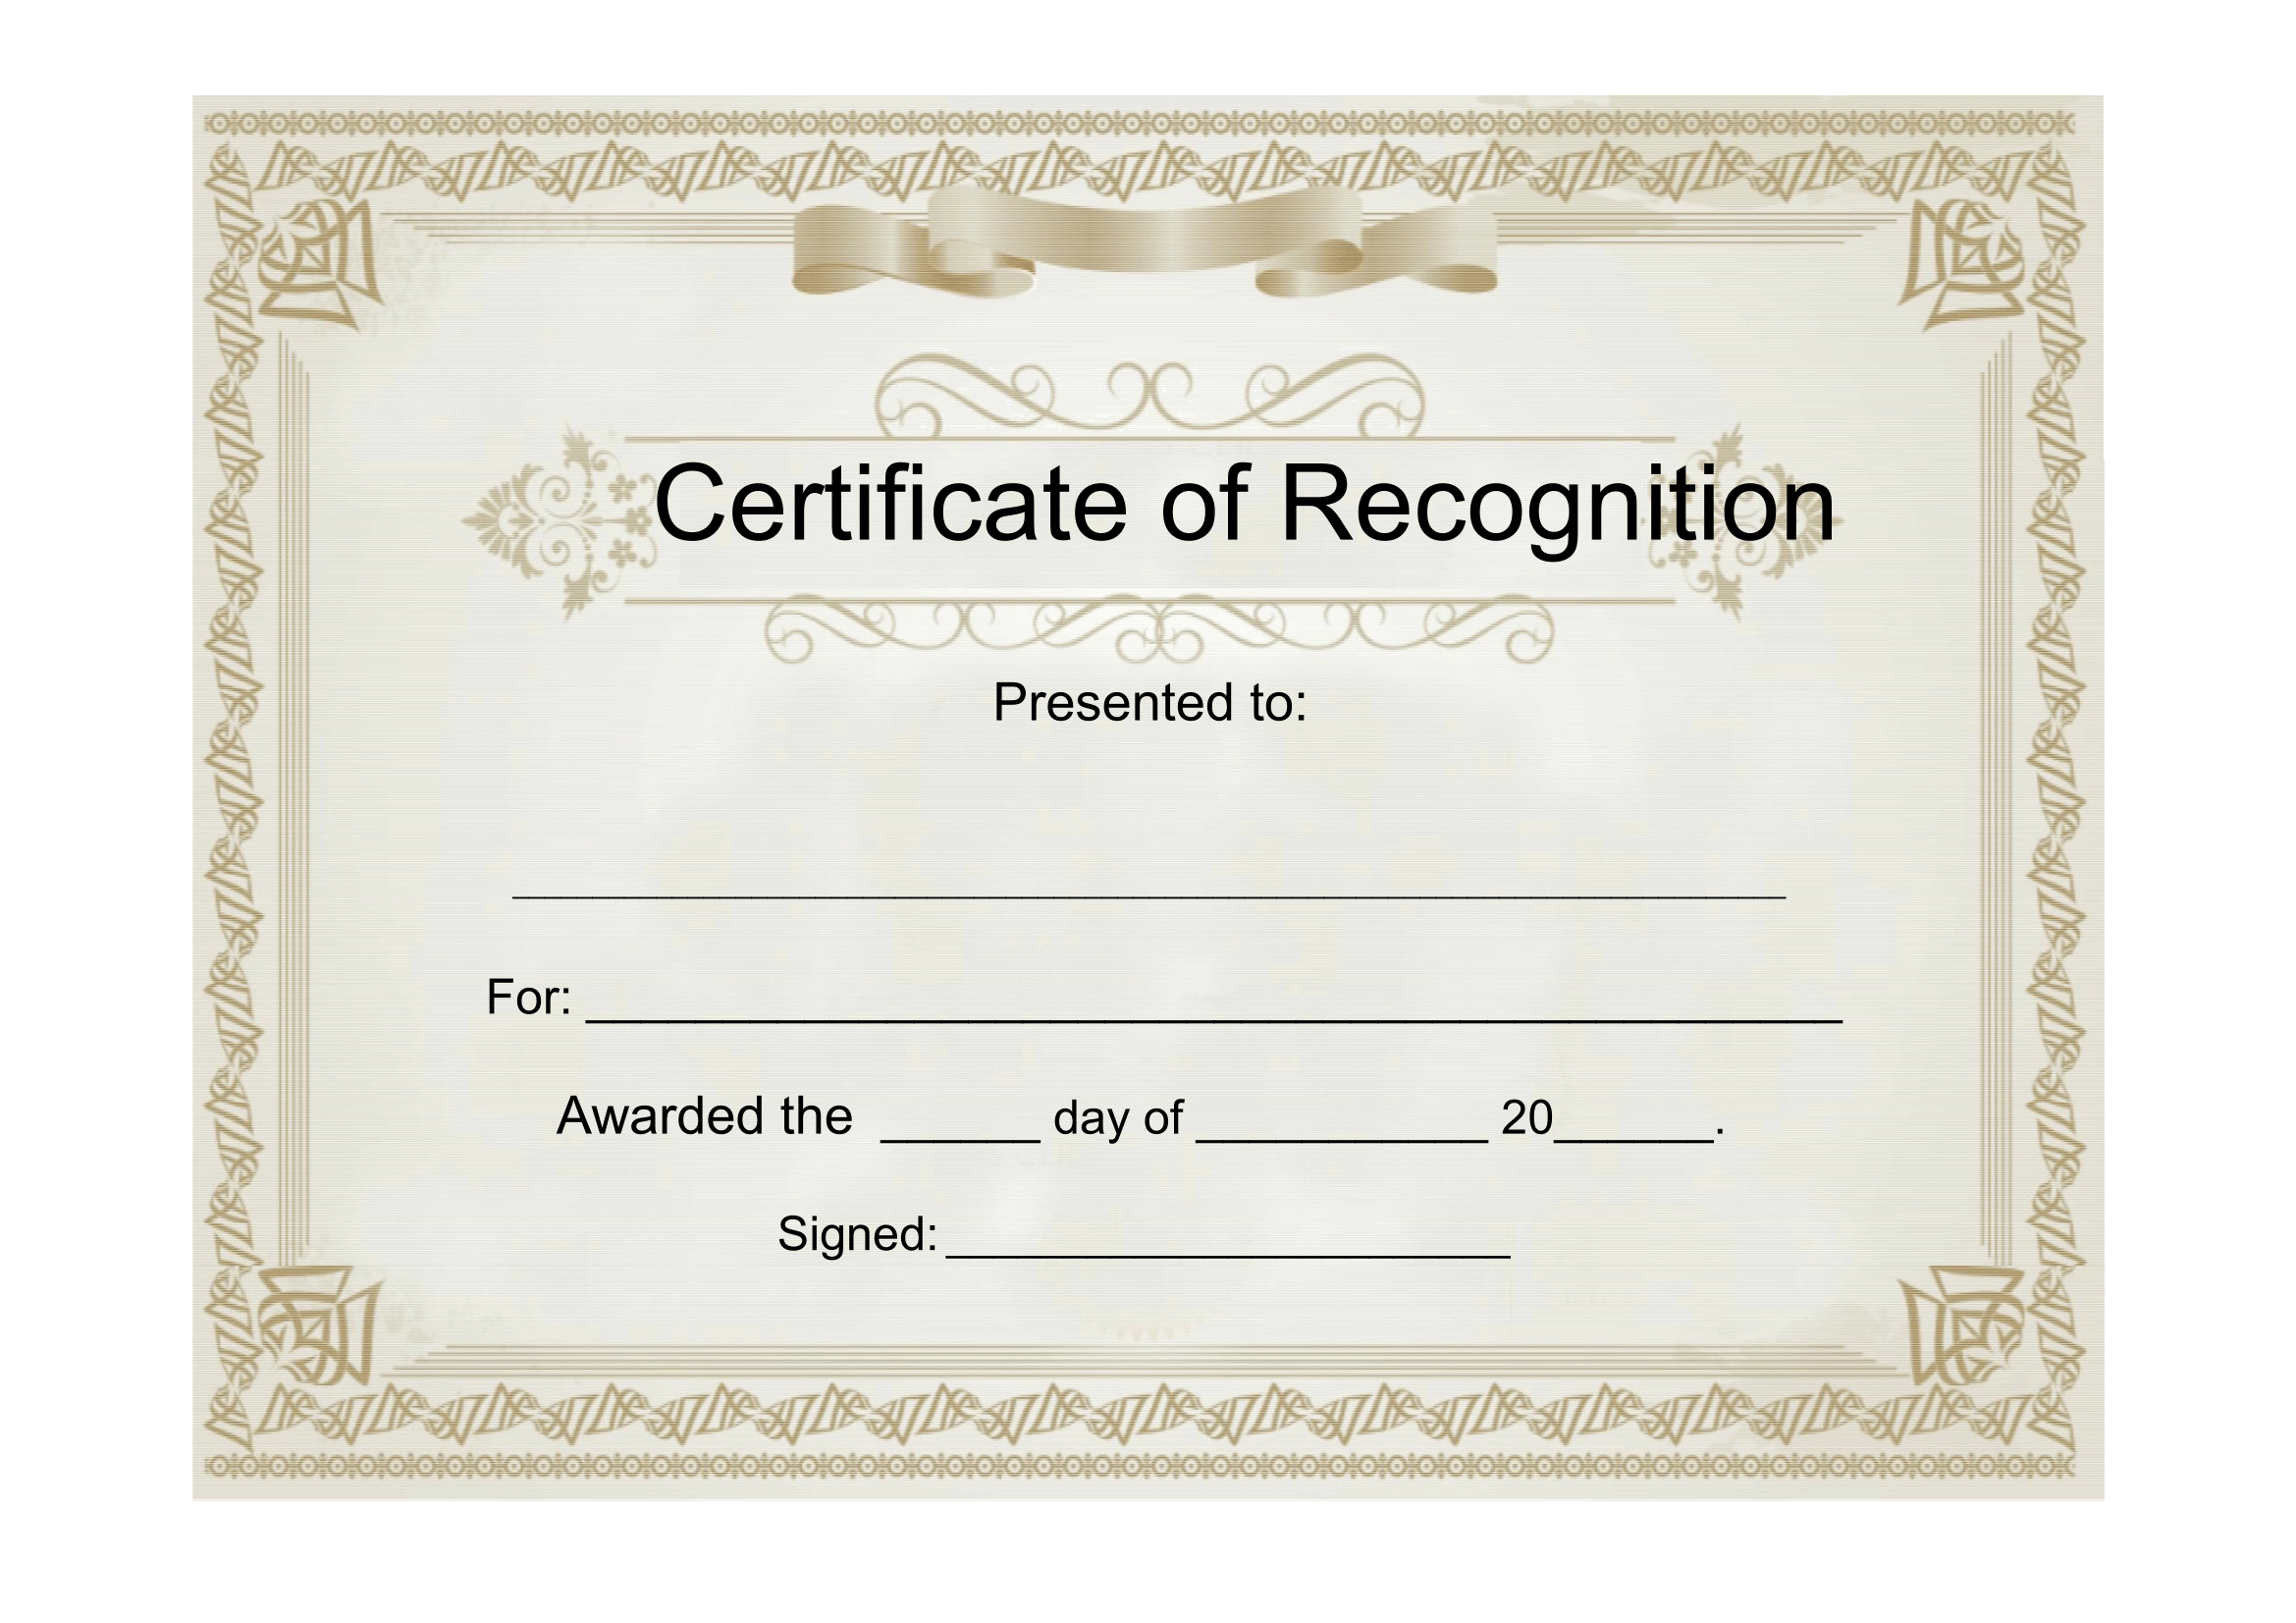 Sample Certificate Of Recognition – Free Download Template Intended For Certificate Templates For Word Free Downloads